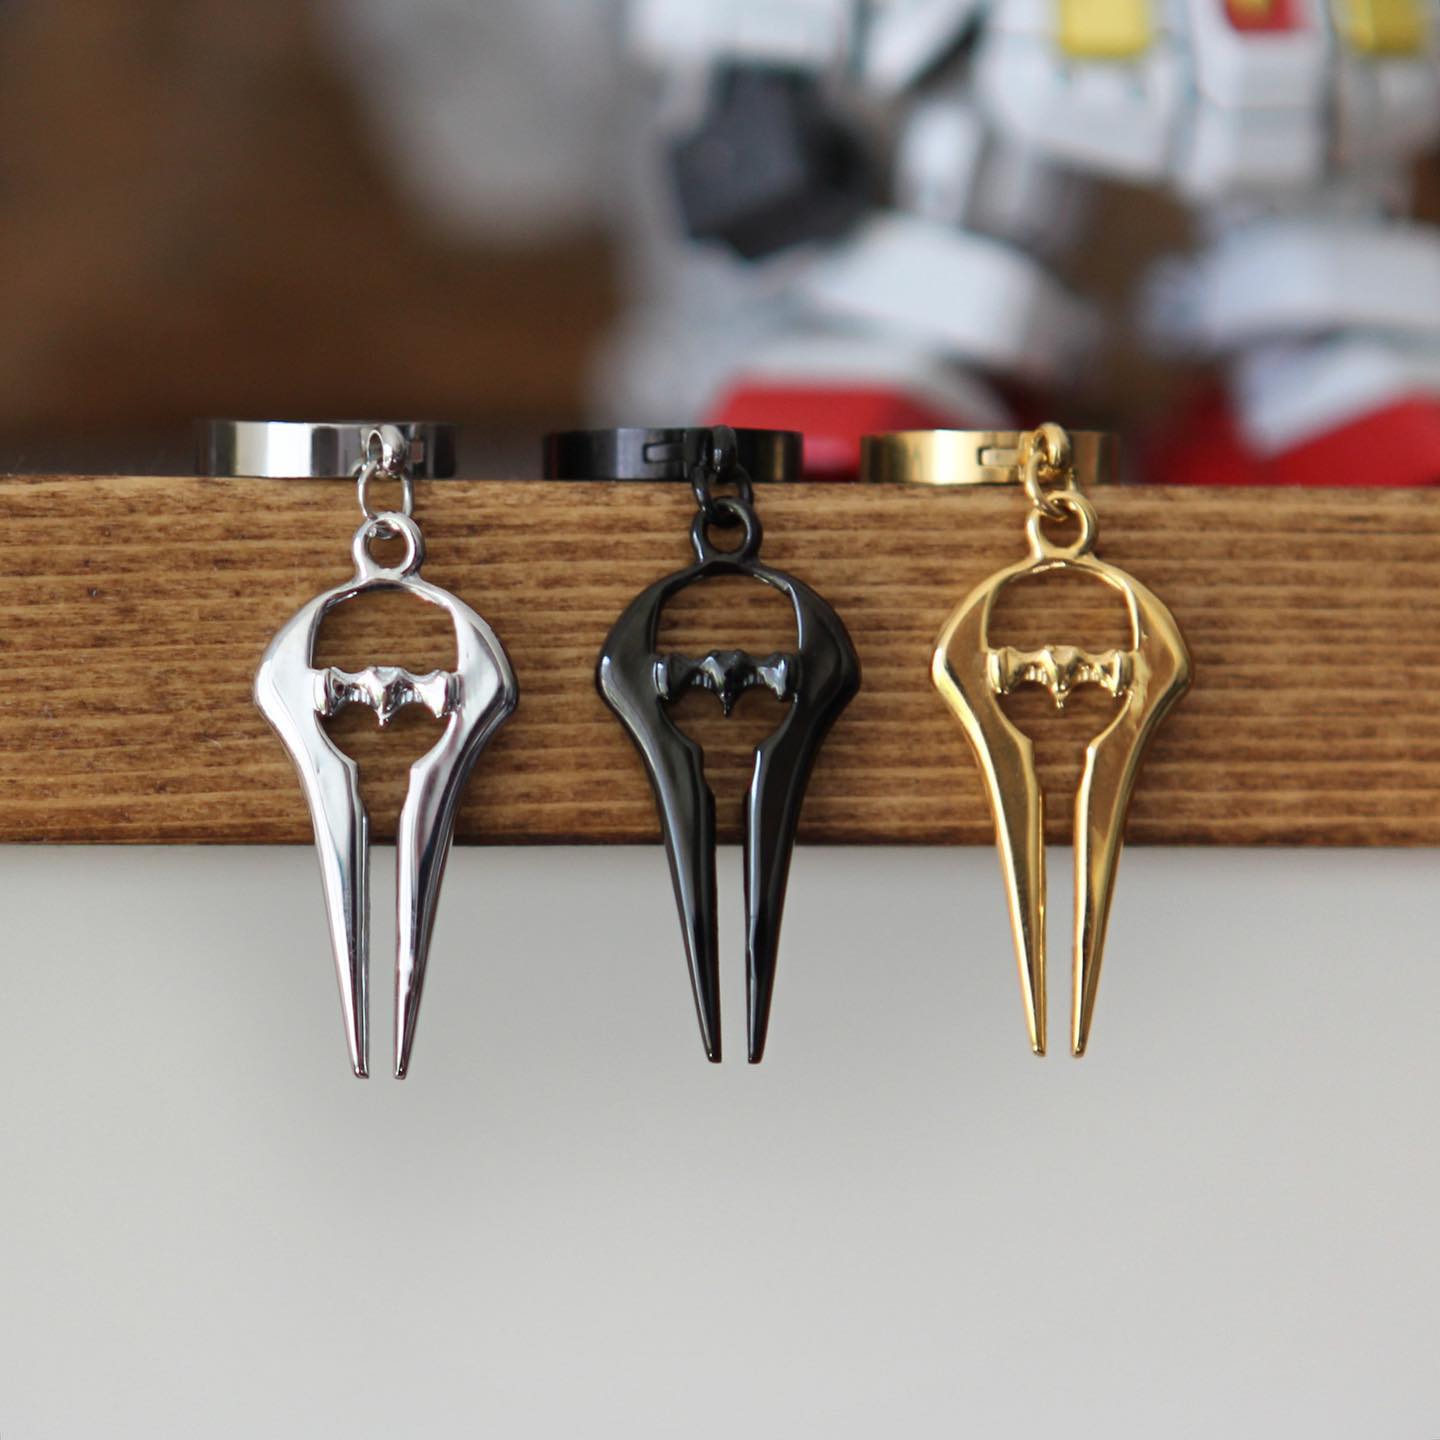 These Energy Sword Earrings are...